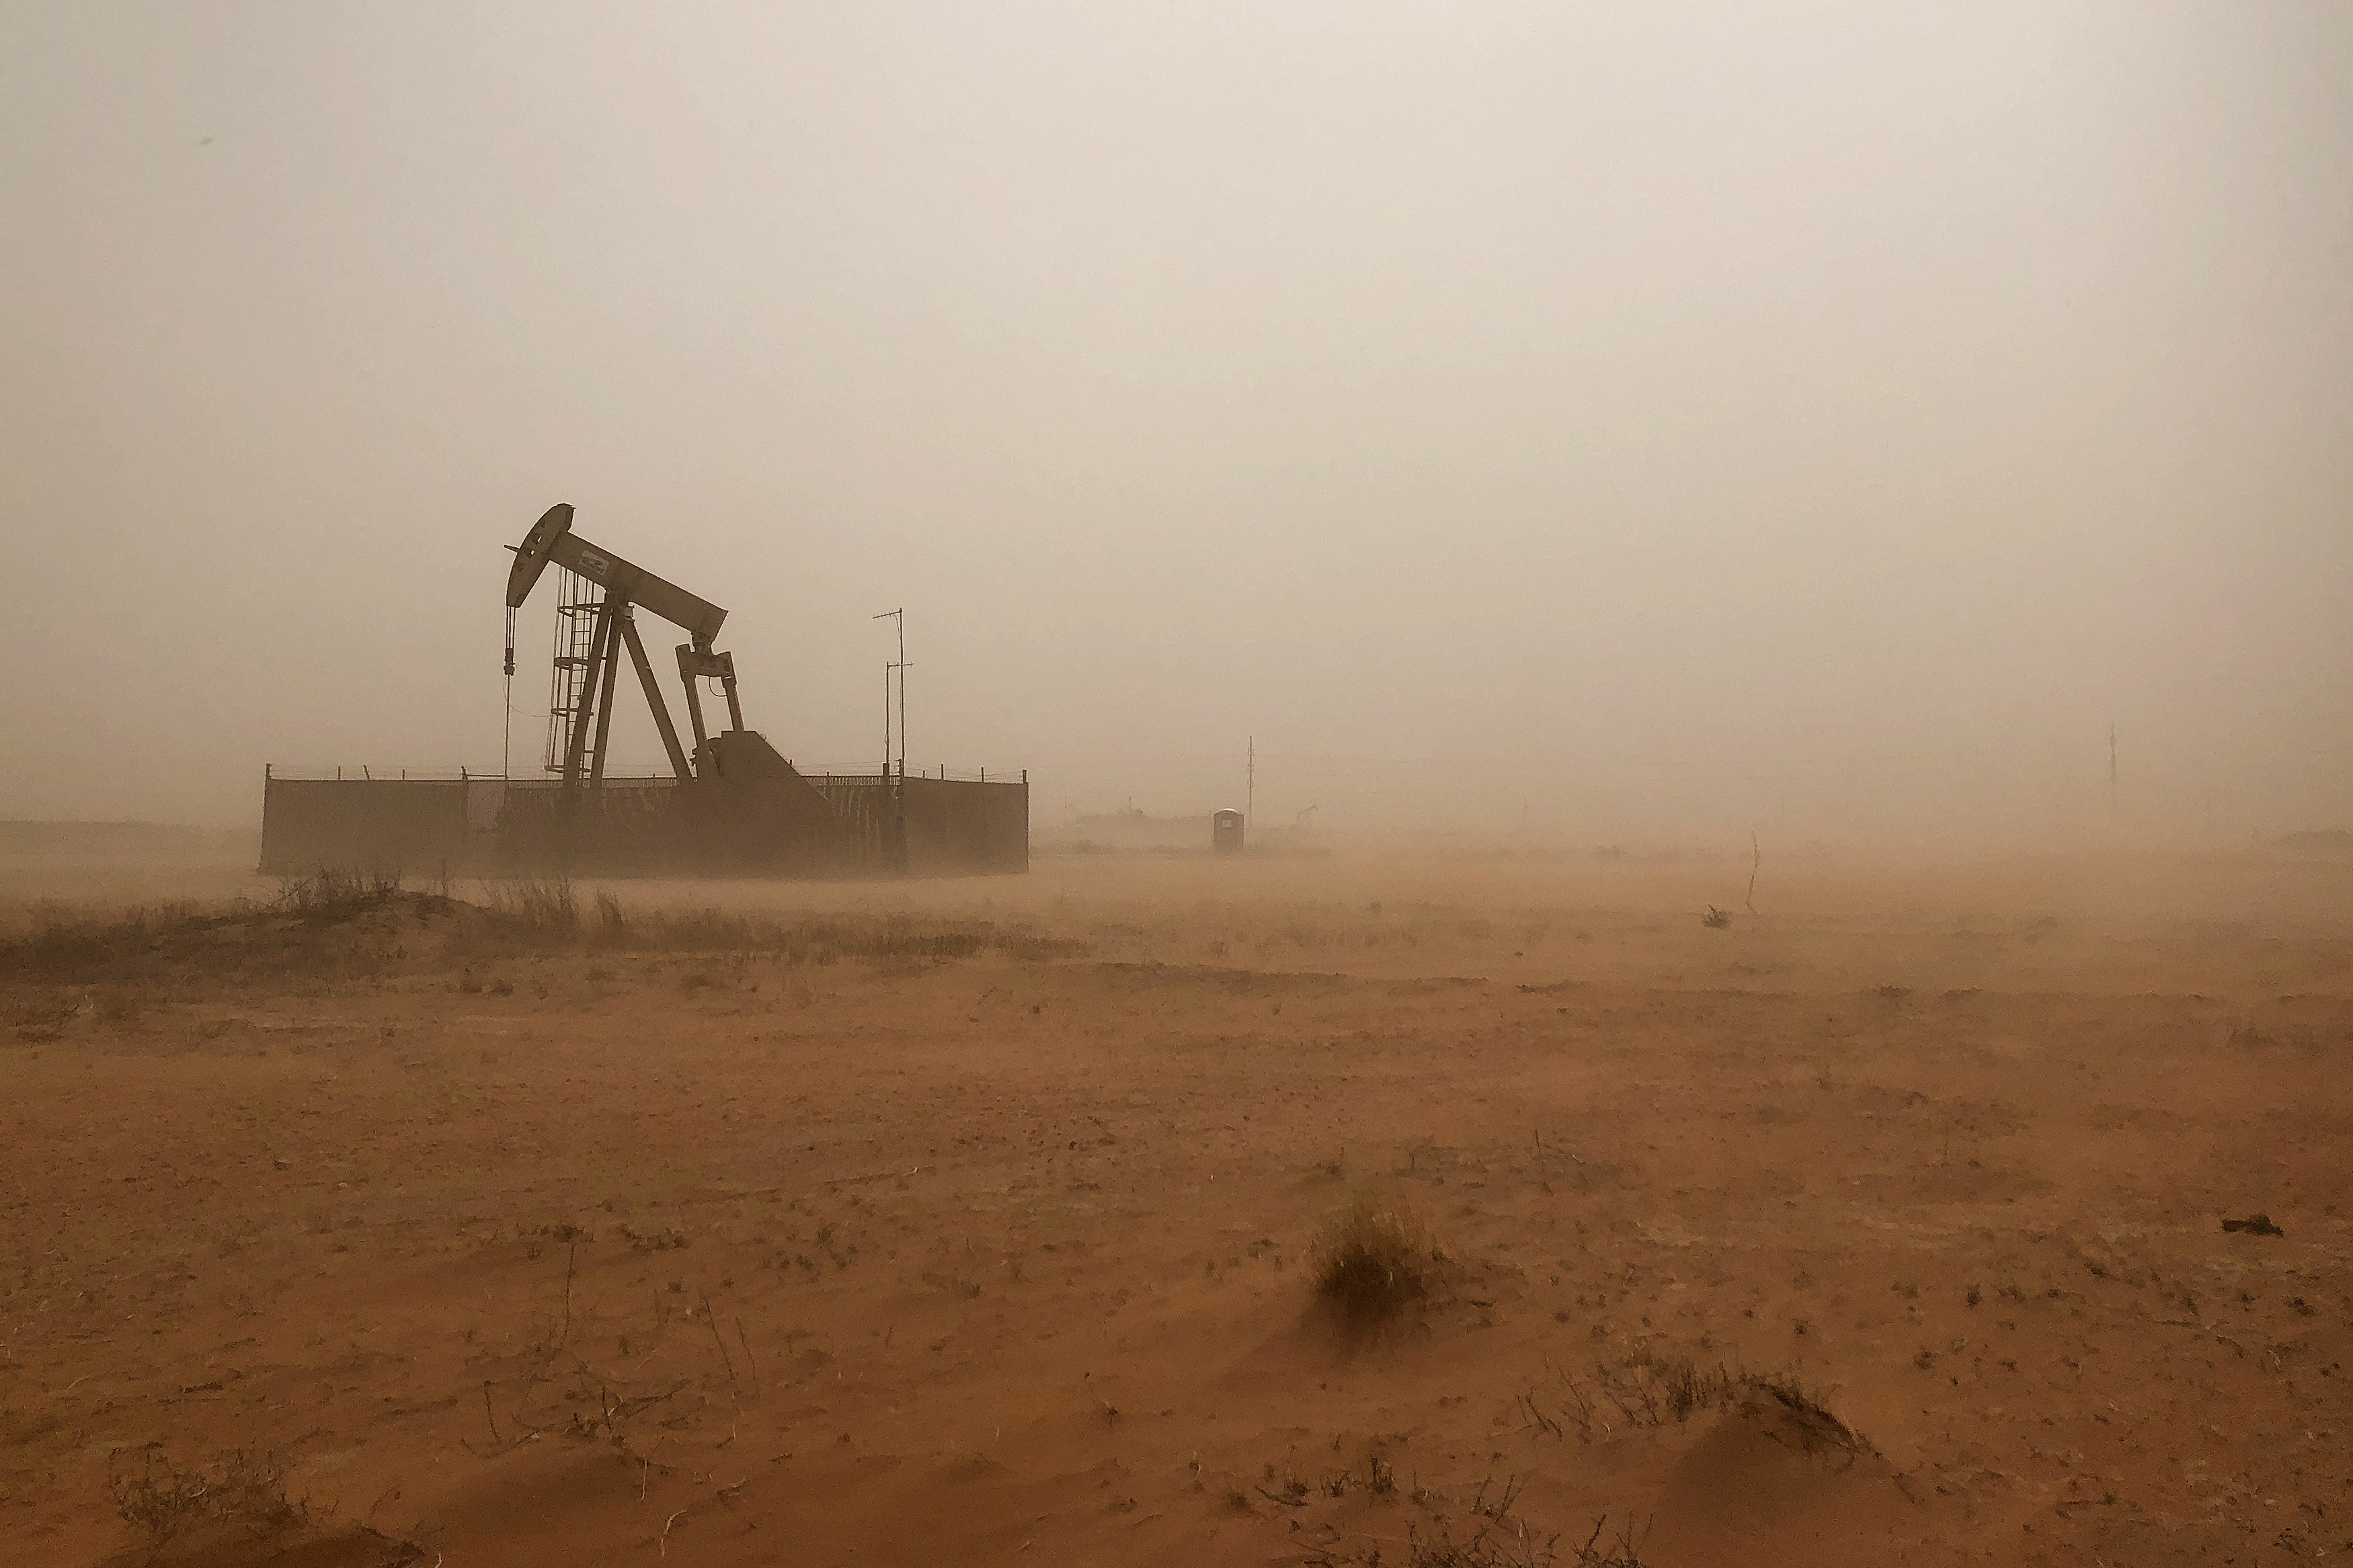 A pump jack lifts oil out of a well during a sandstorm in Midland